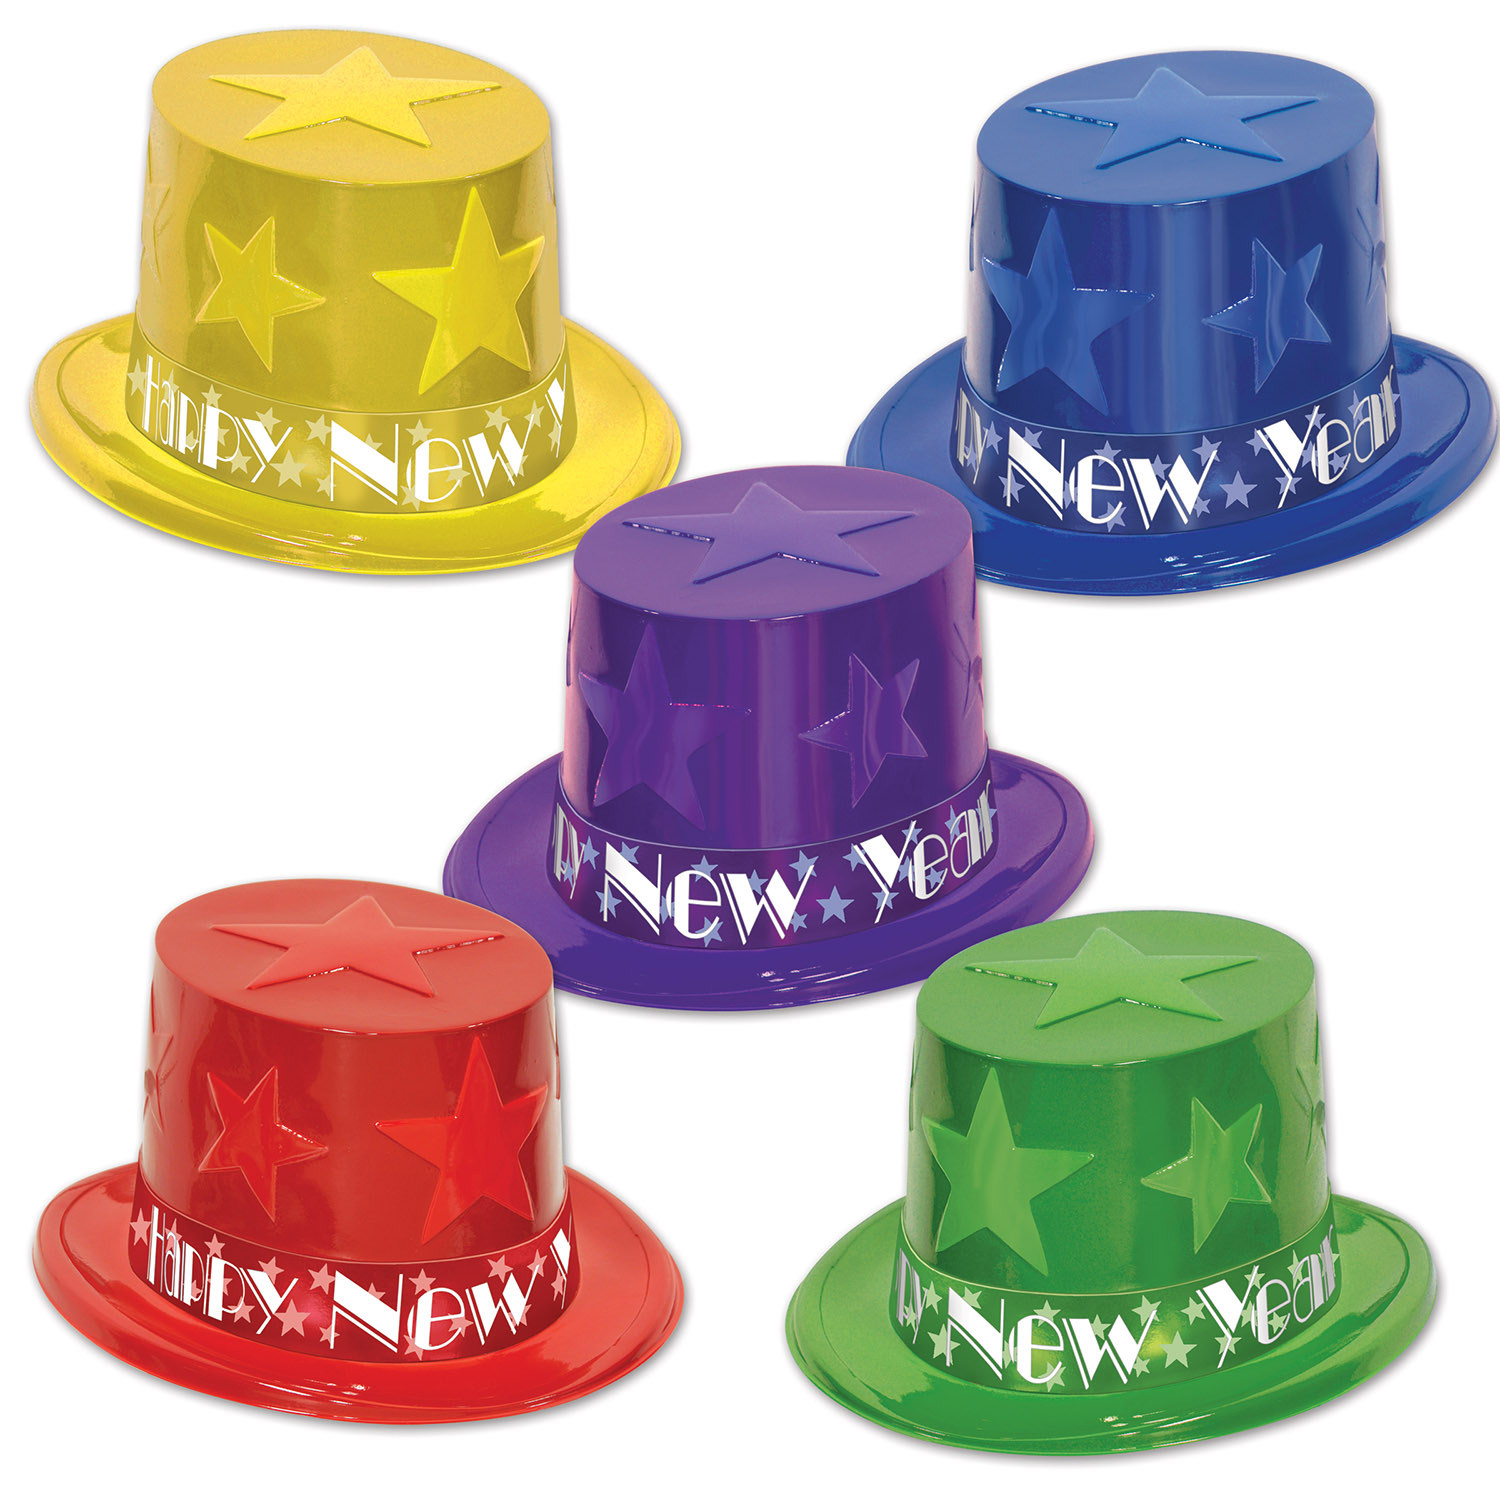 assorted color party top hats with stars on them with happy new year bands around the bottom